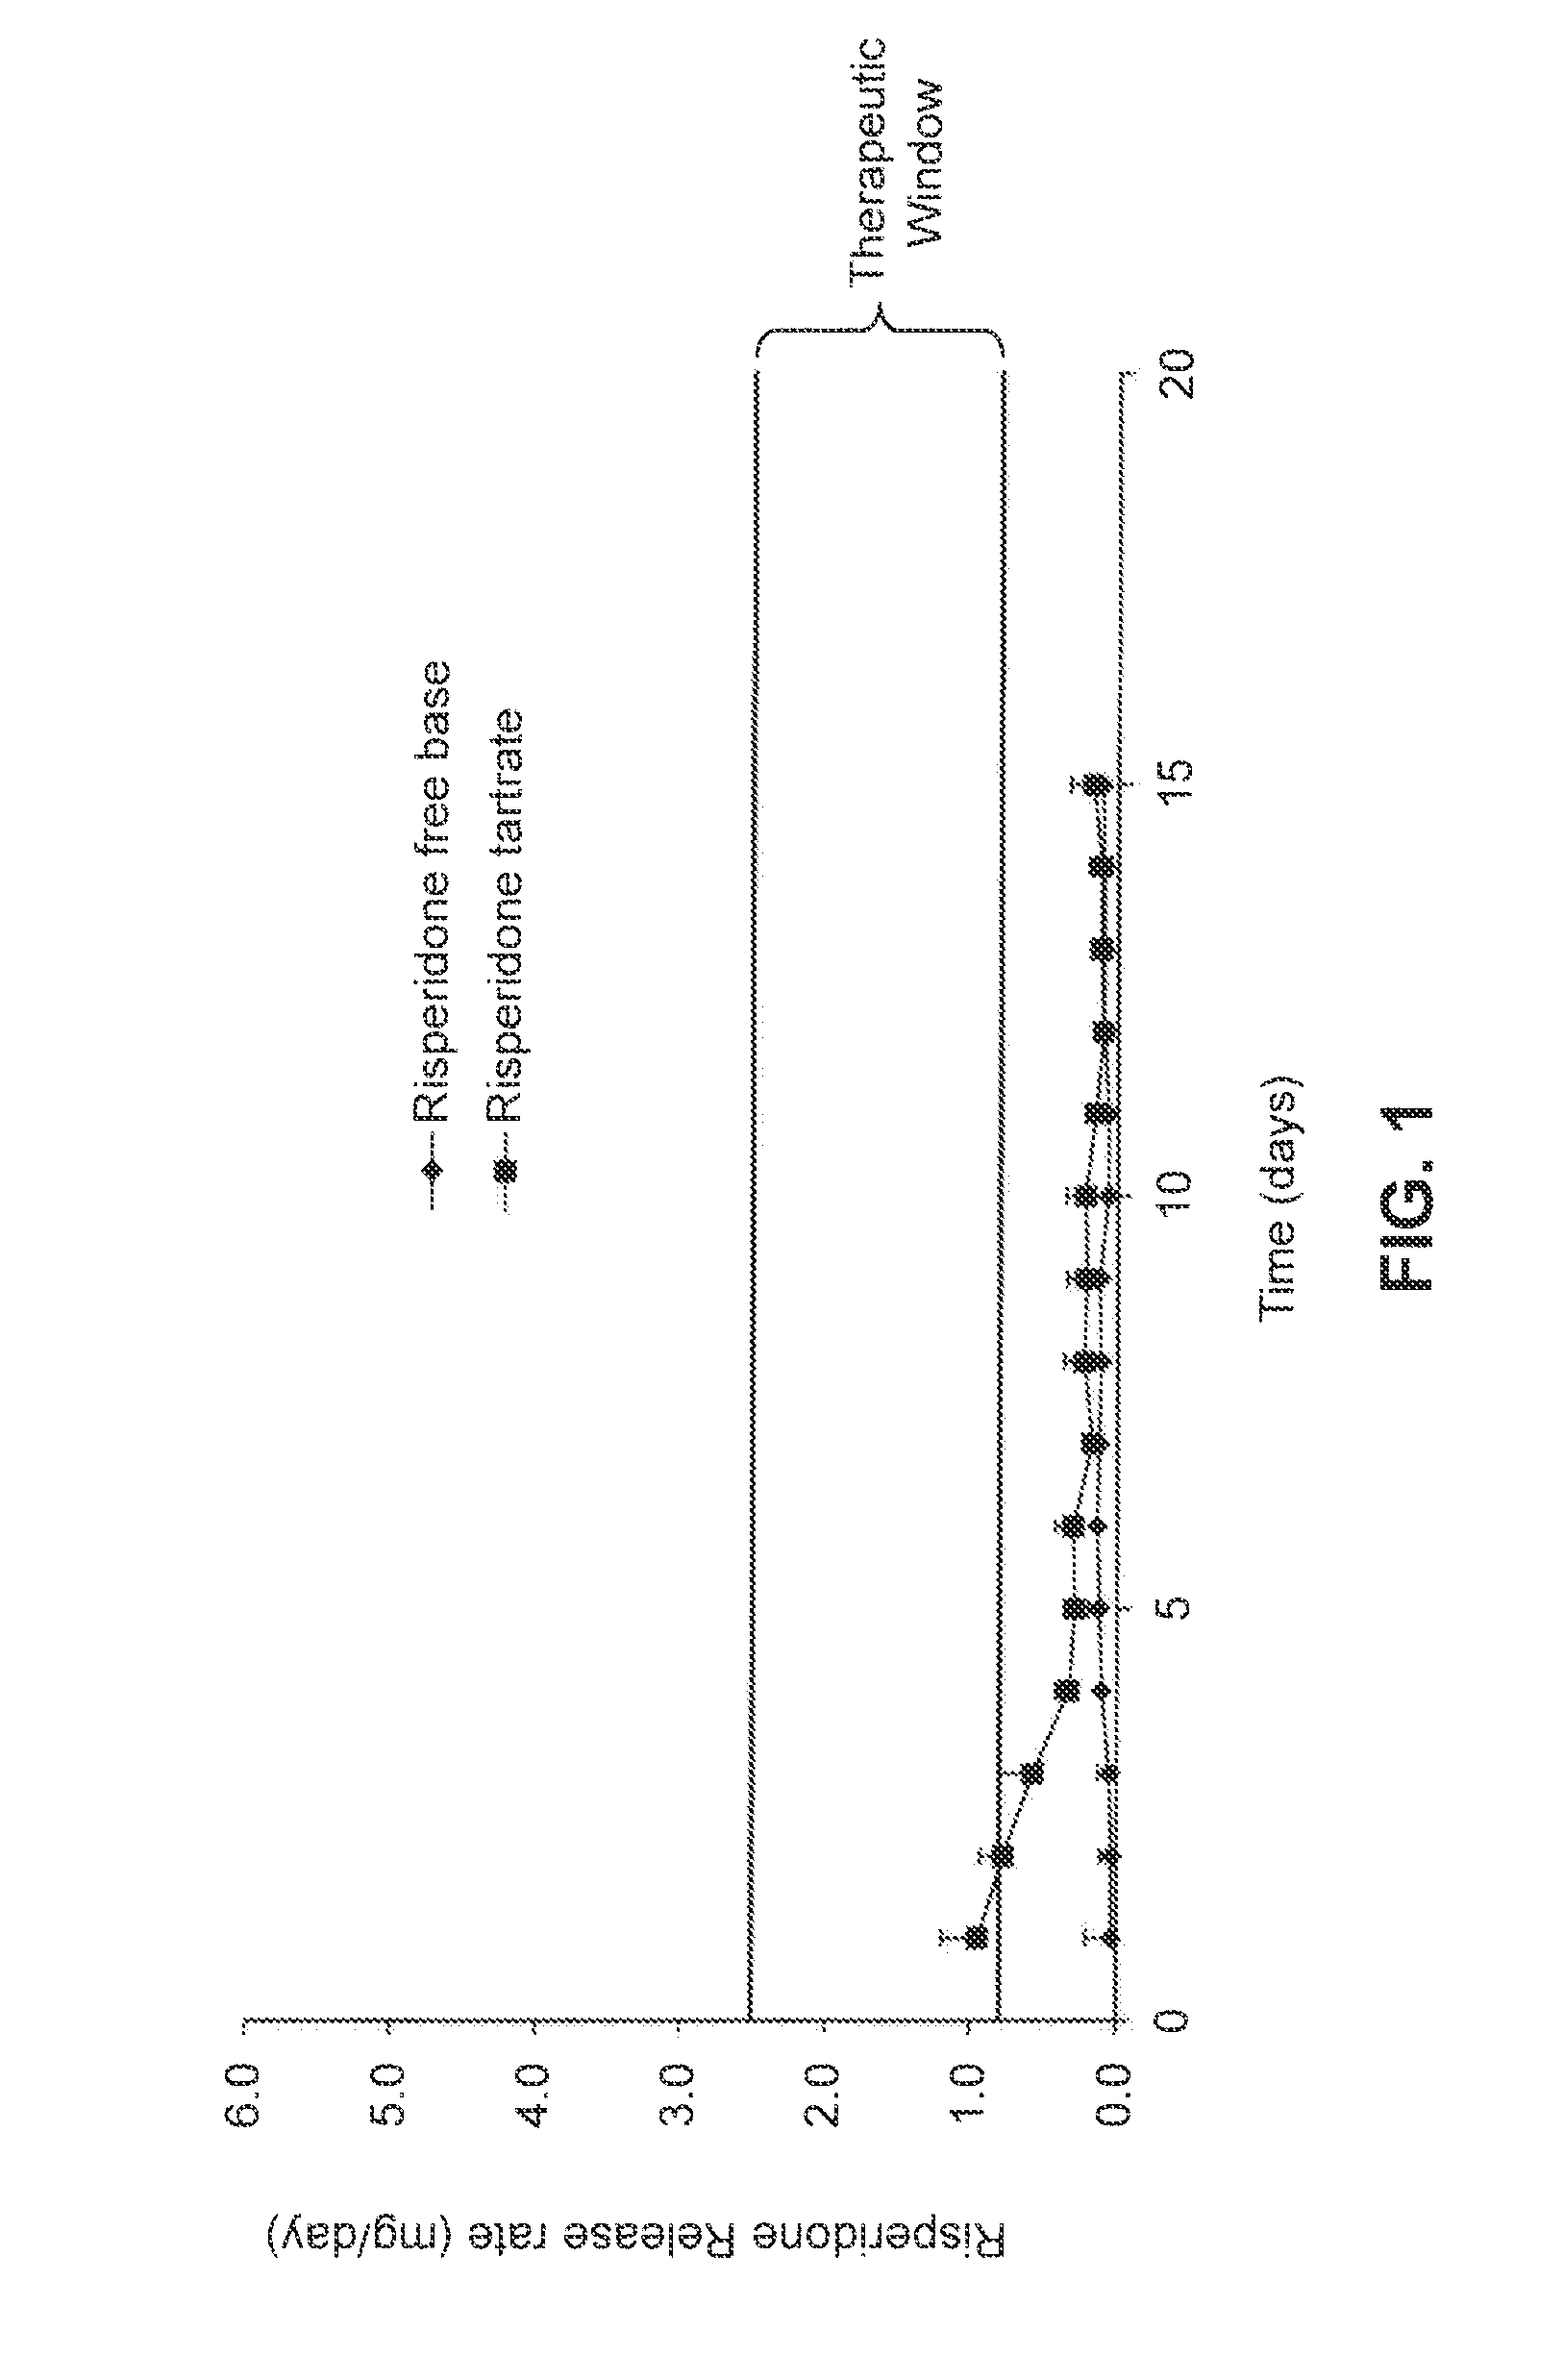 Device and method for sustained release of antipsychotic medications